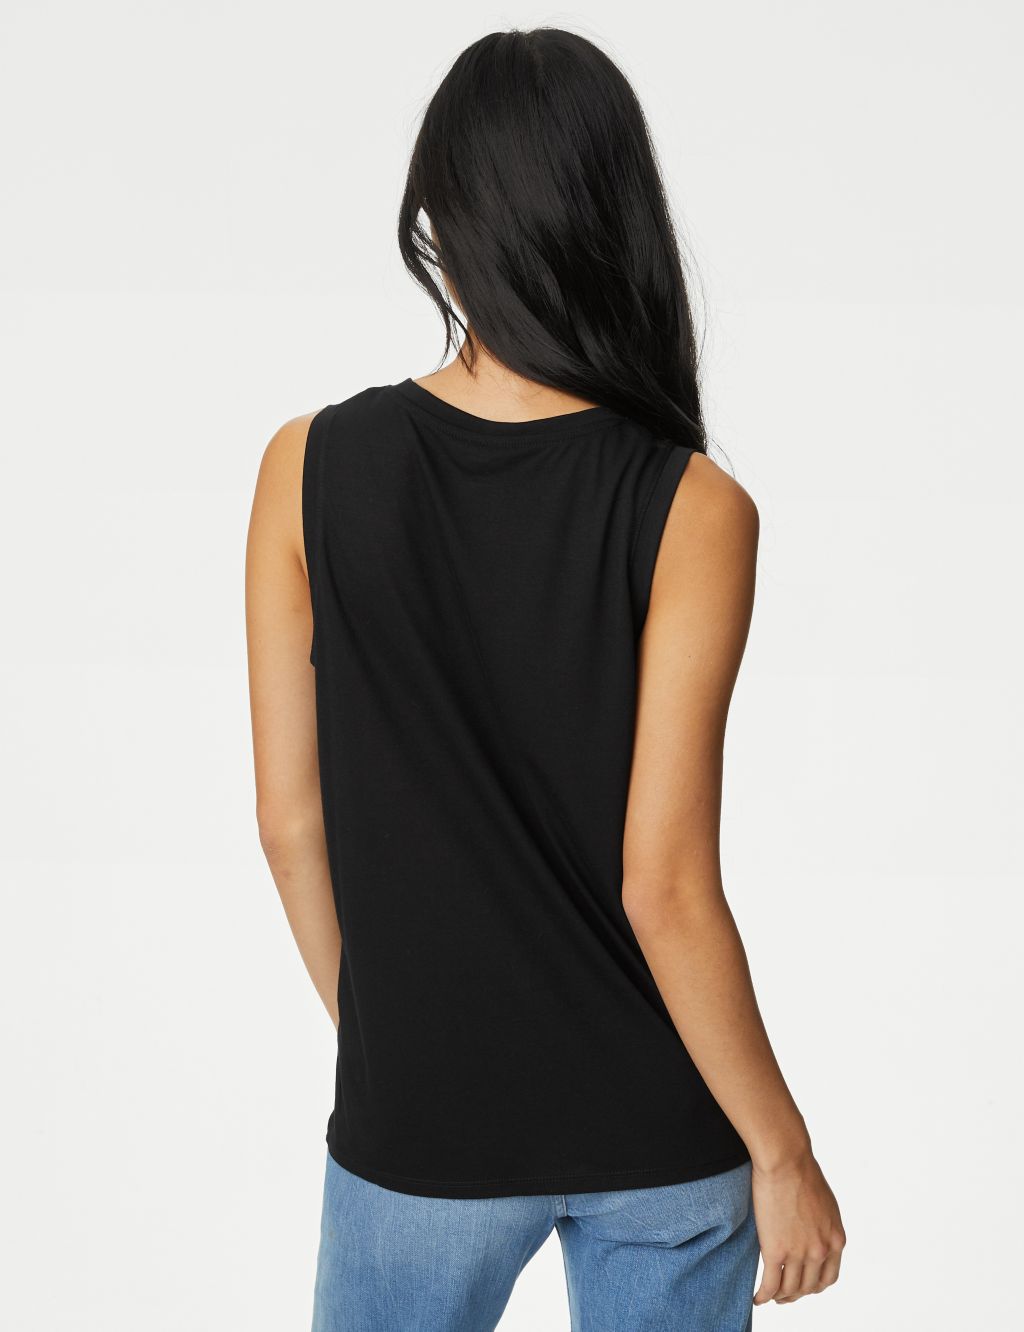 Relaxed Vest Top | M&S Collection | M&S